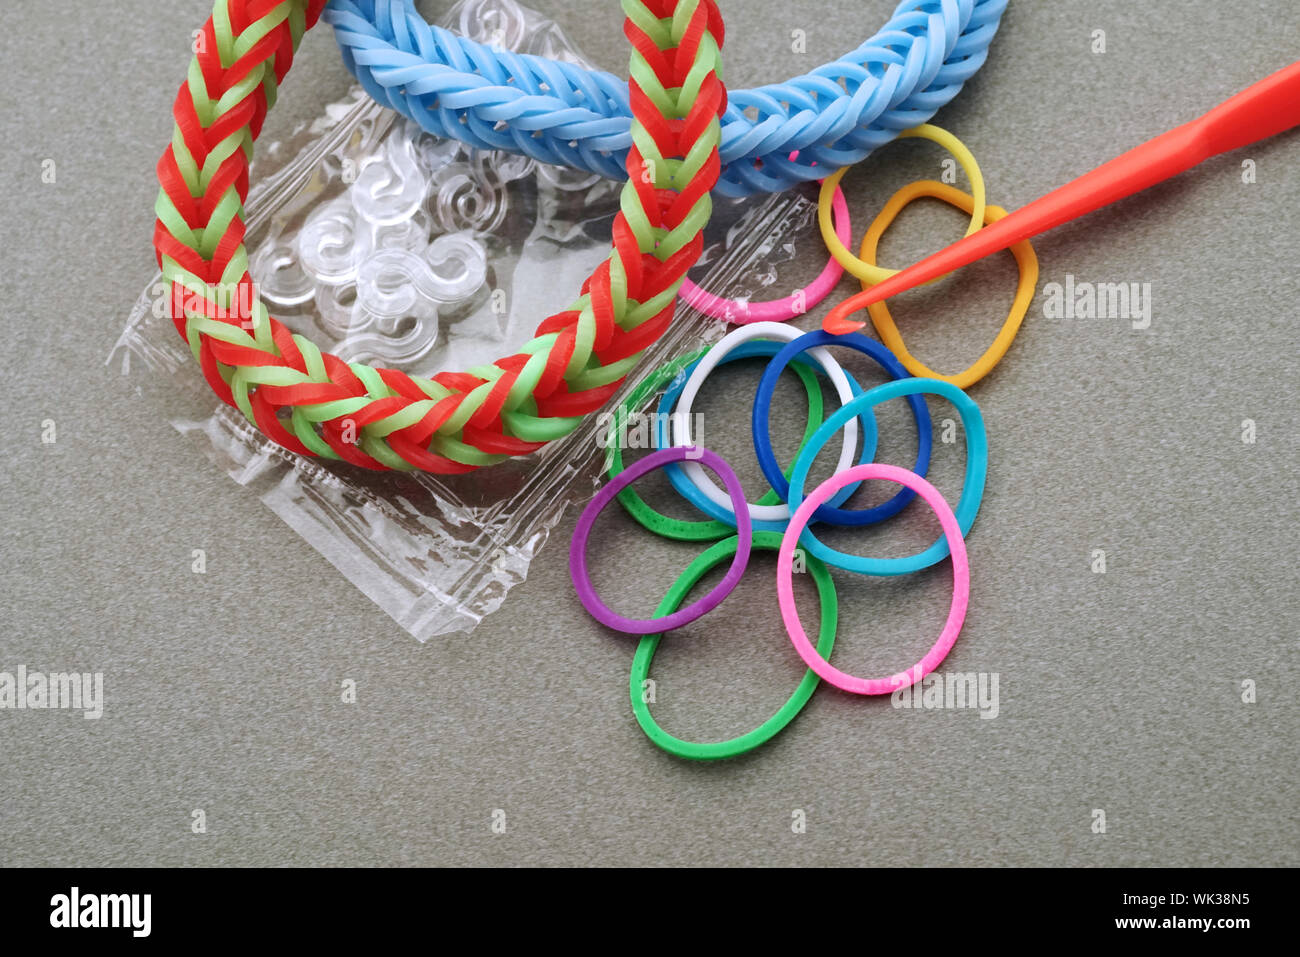 High Angle View Of Bracelets On Table Stock Photo